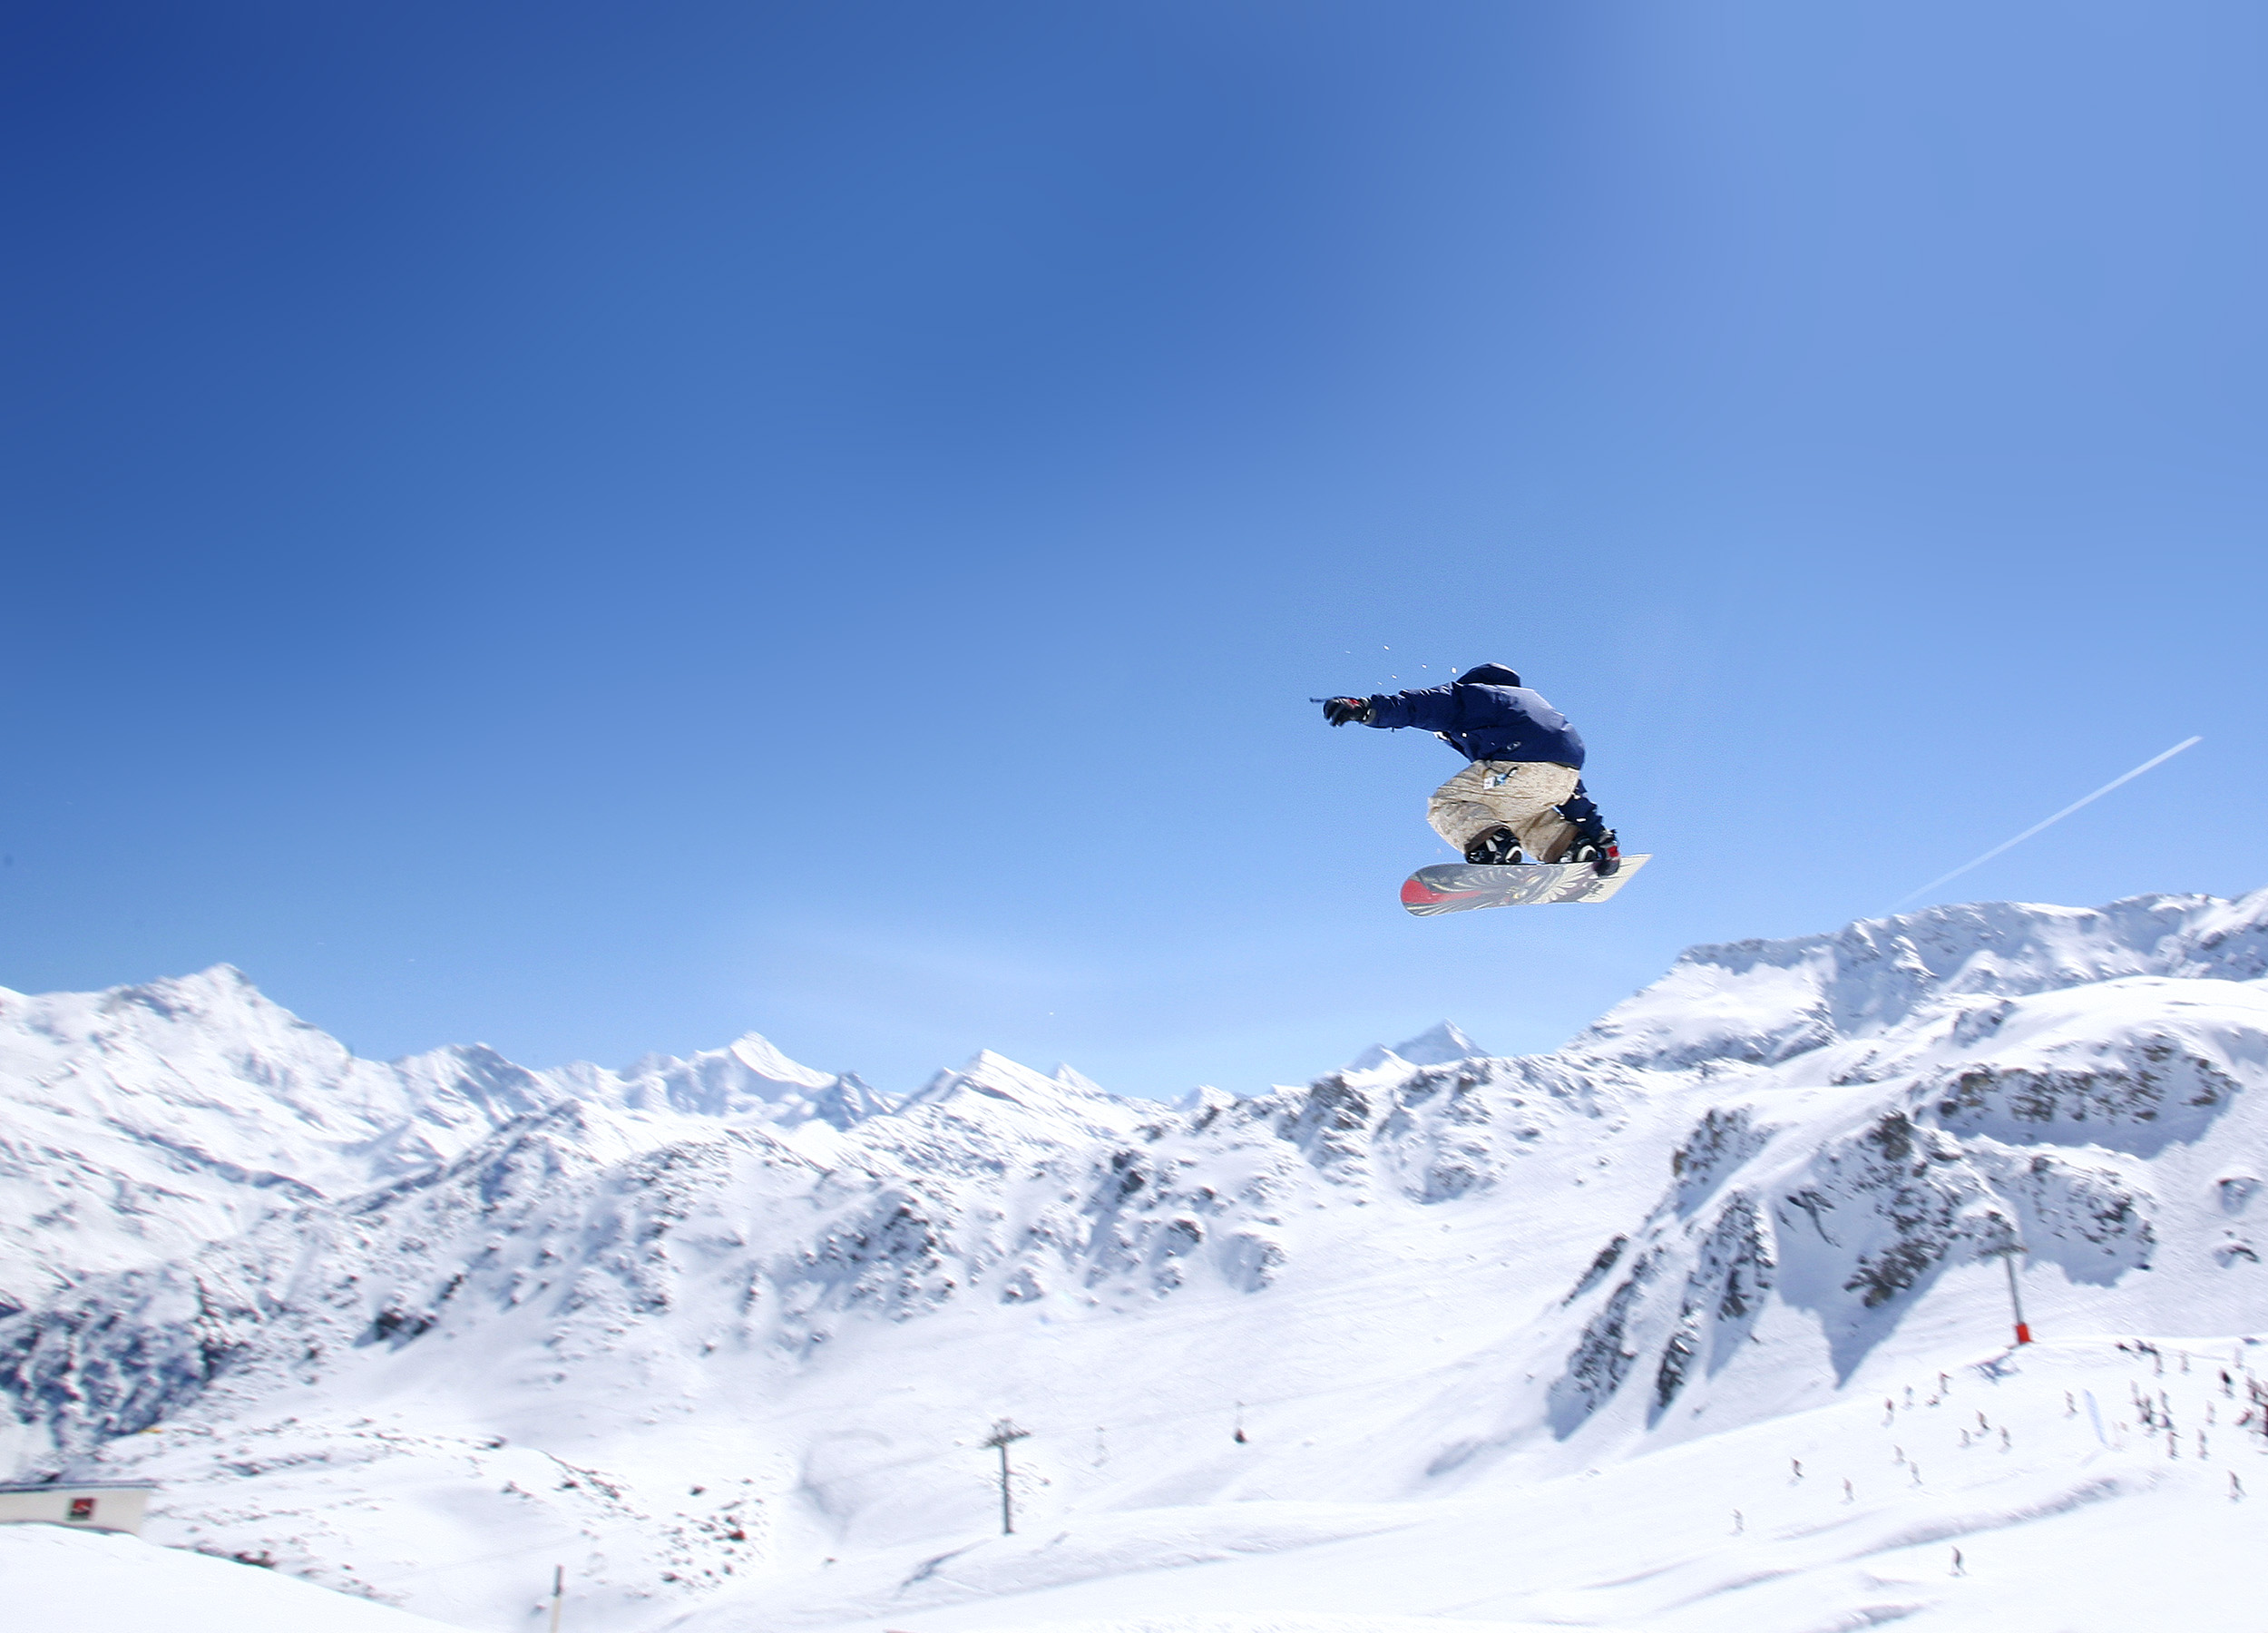  A skier mid-jump in Grimentz